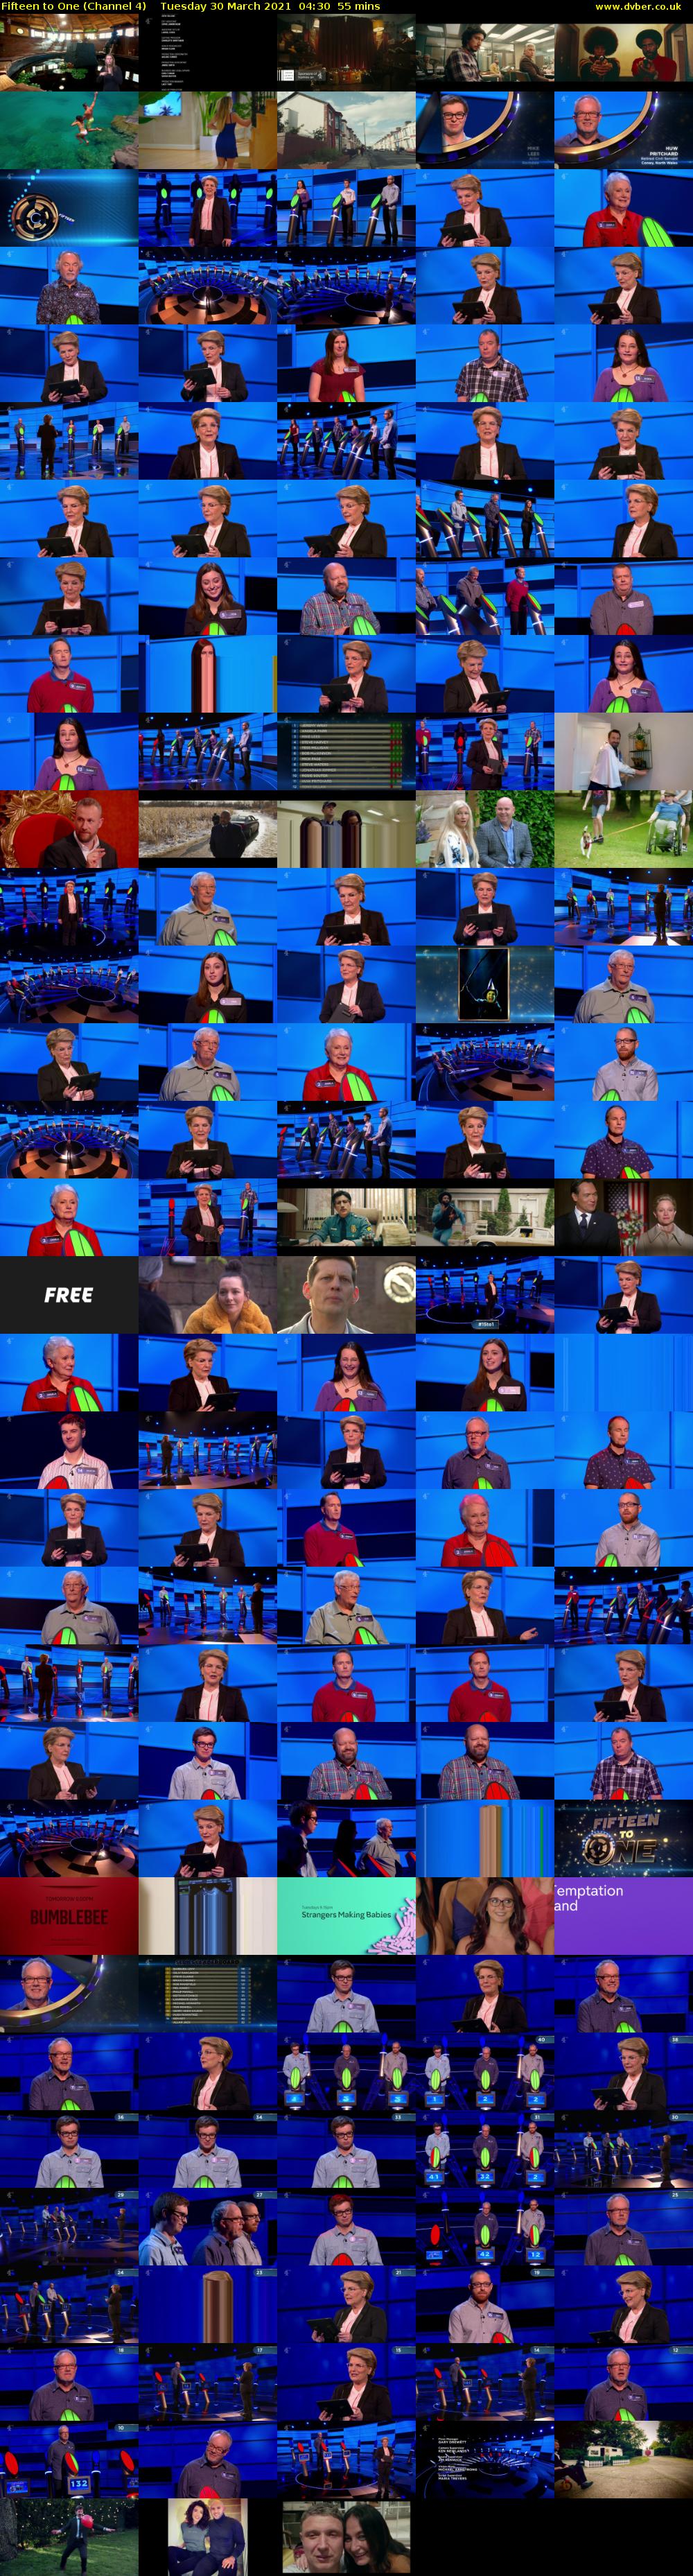 Fifteen to One (Channel 4) Tuesday 30 March 2021 04:30 - 05:25